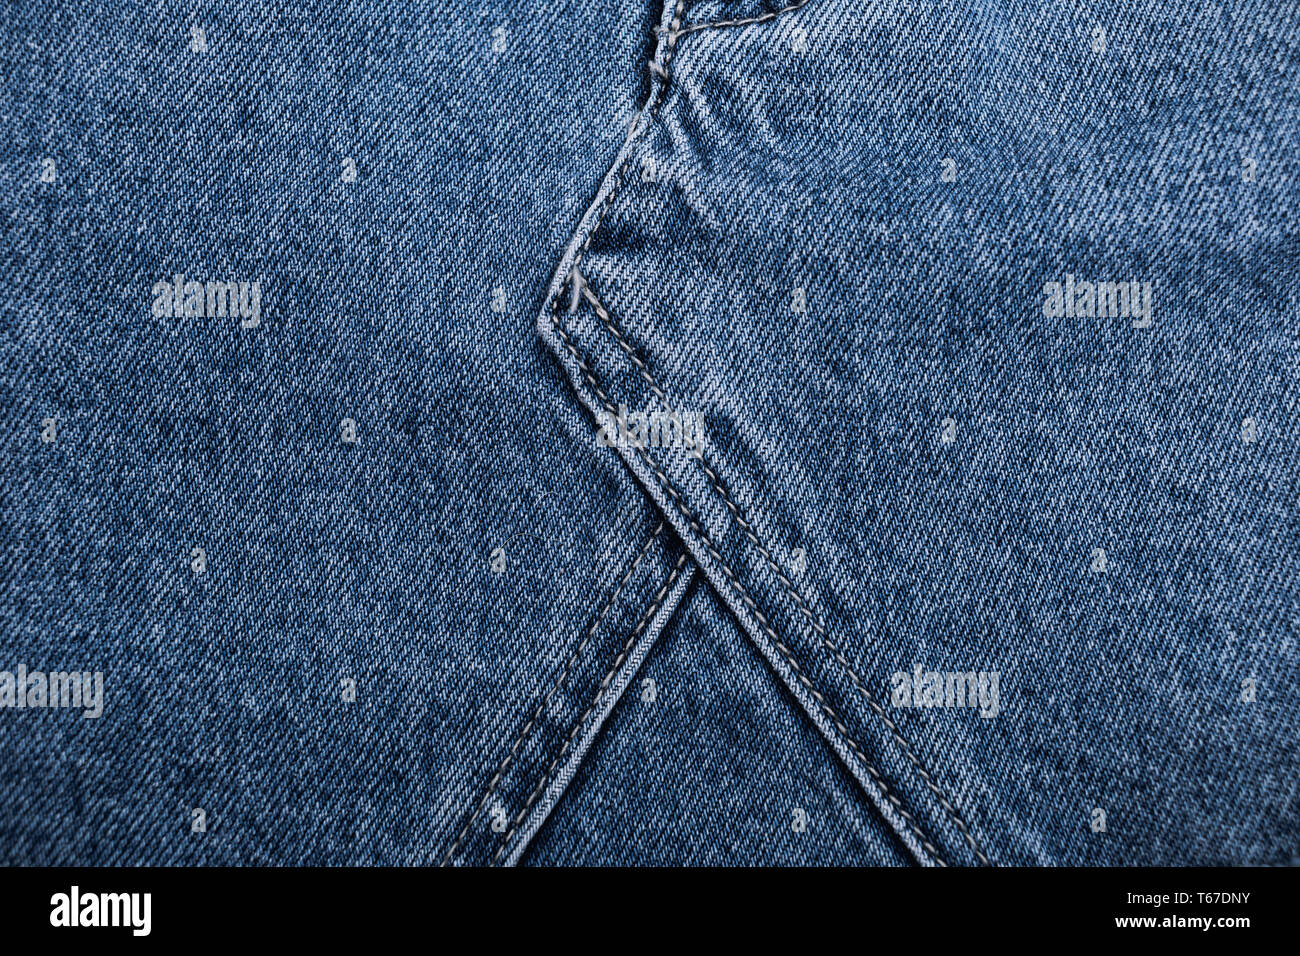 Denim jeans texture background with torn. The texture of the colored cotton fabric. Stitched texture jeans background. Pocket and rivet on jeans. Fibe Stock Photo